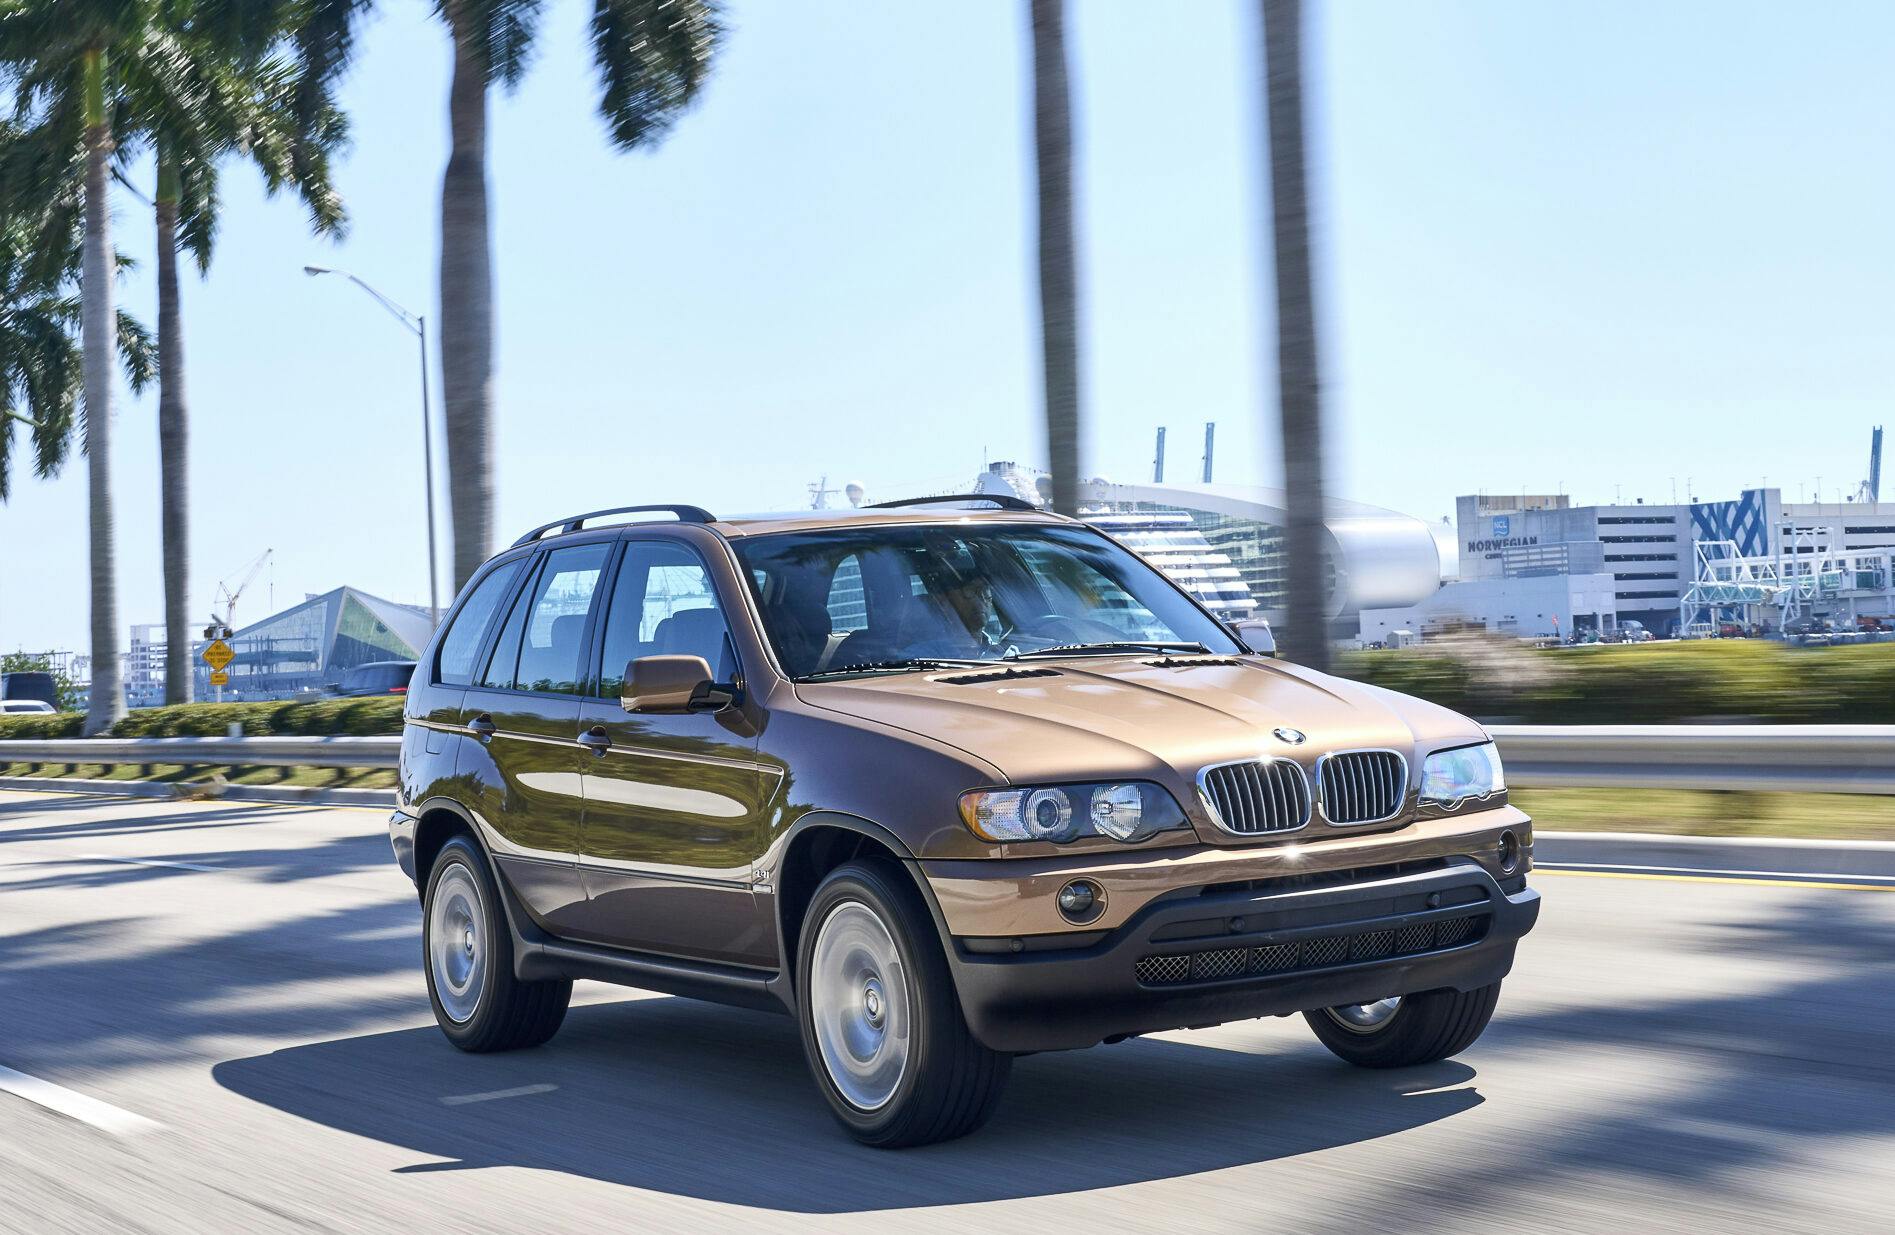 Bought my old BMW E53 X5, 7 years later! 